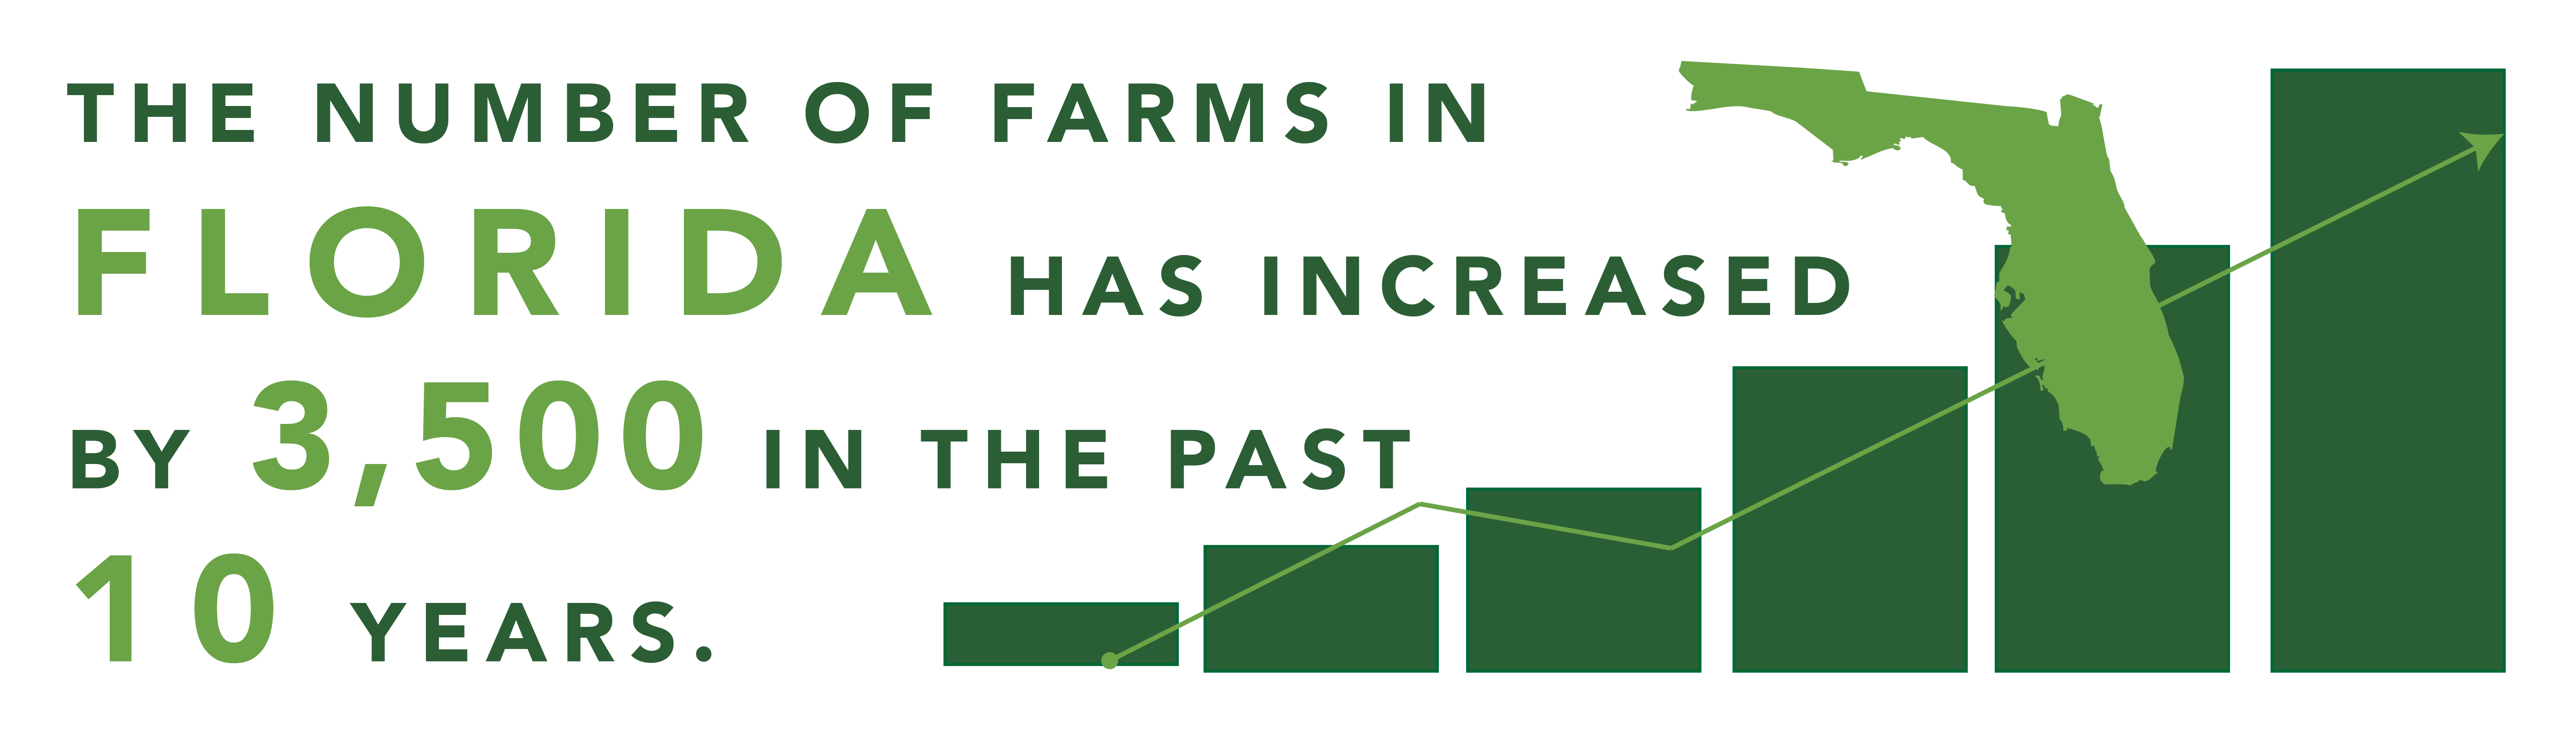 The number of farms in Florida has increased by 3500 in the past 10 years.